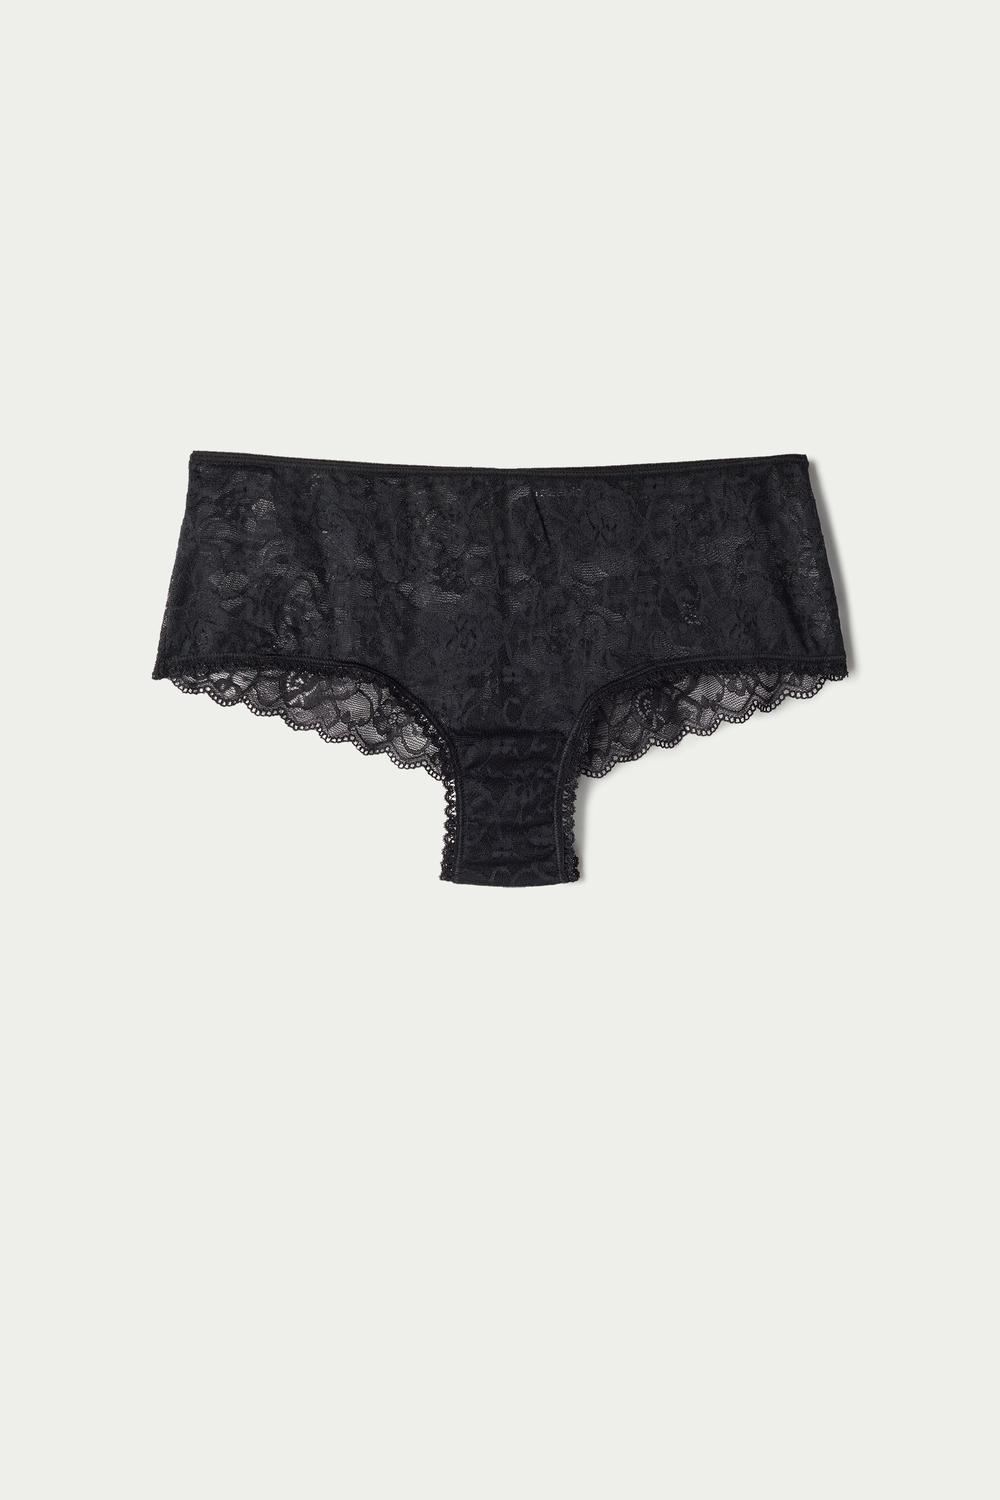 Lace French Knickers - Tezenis